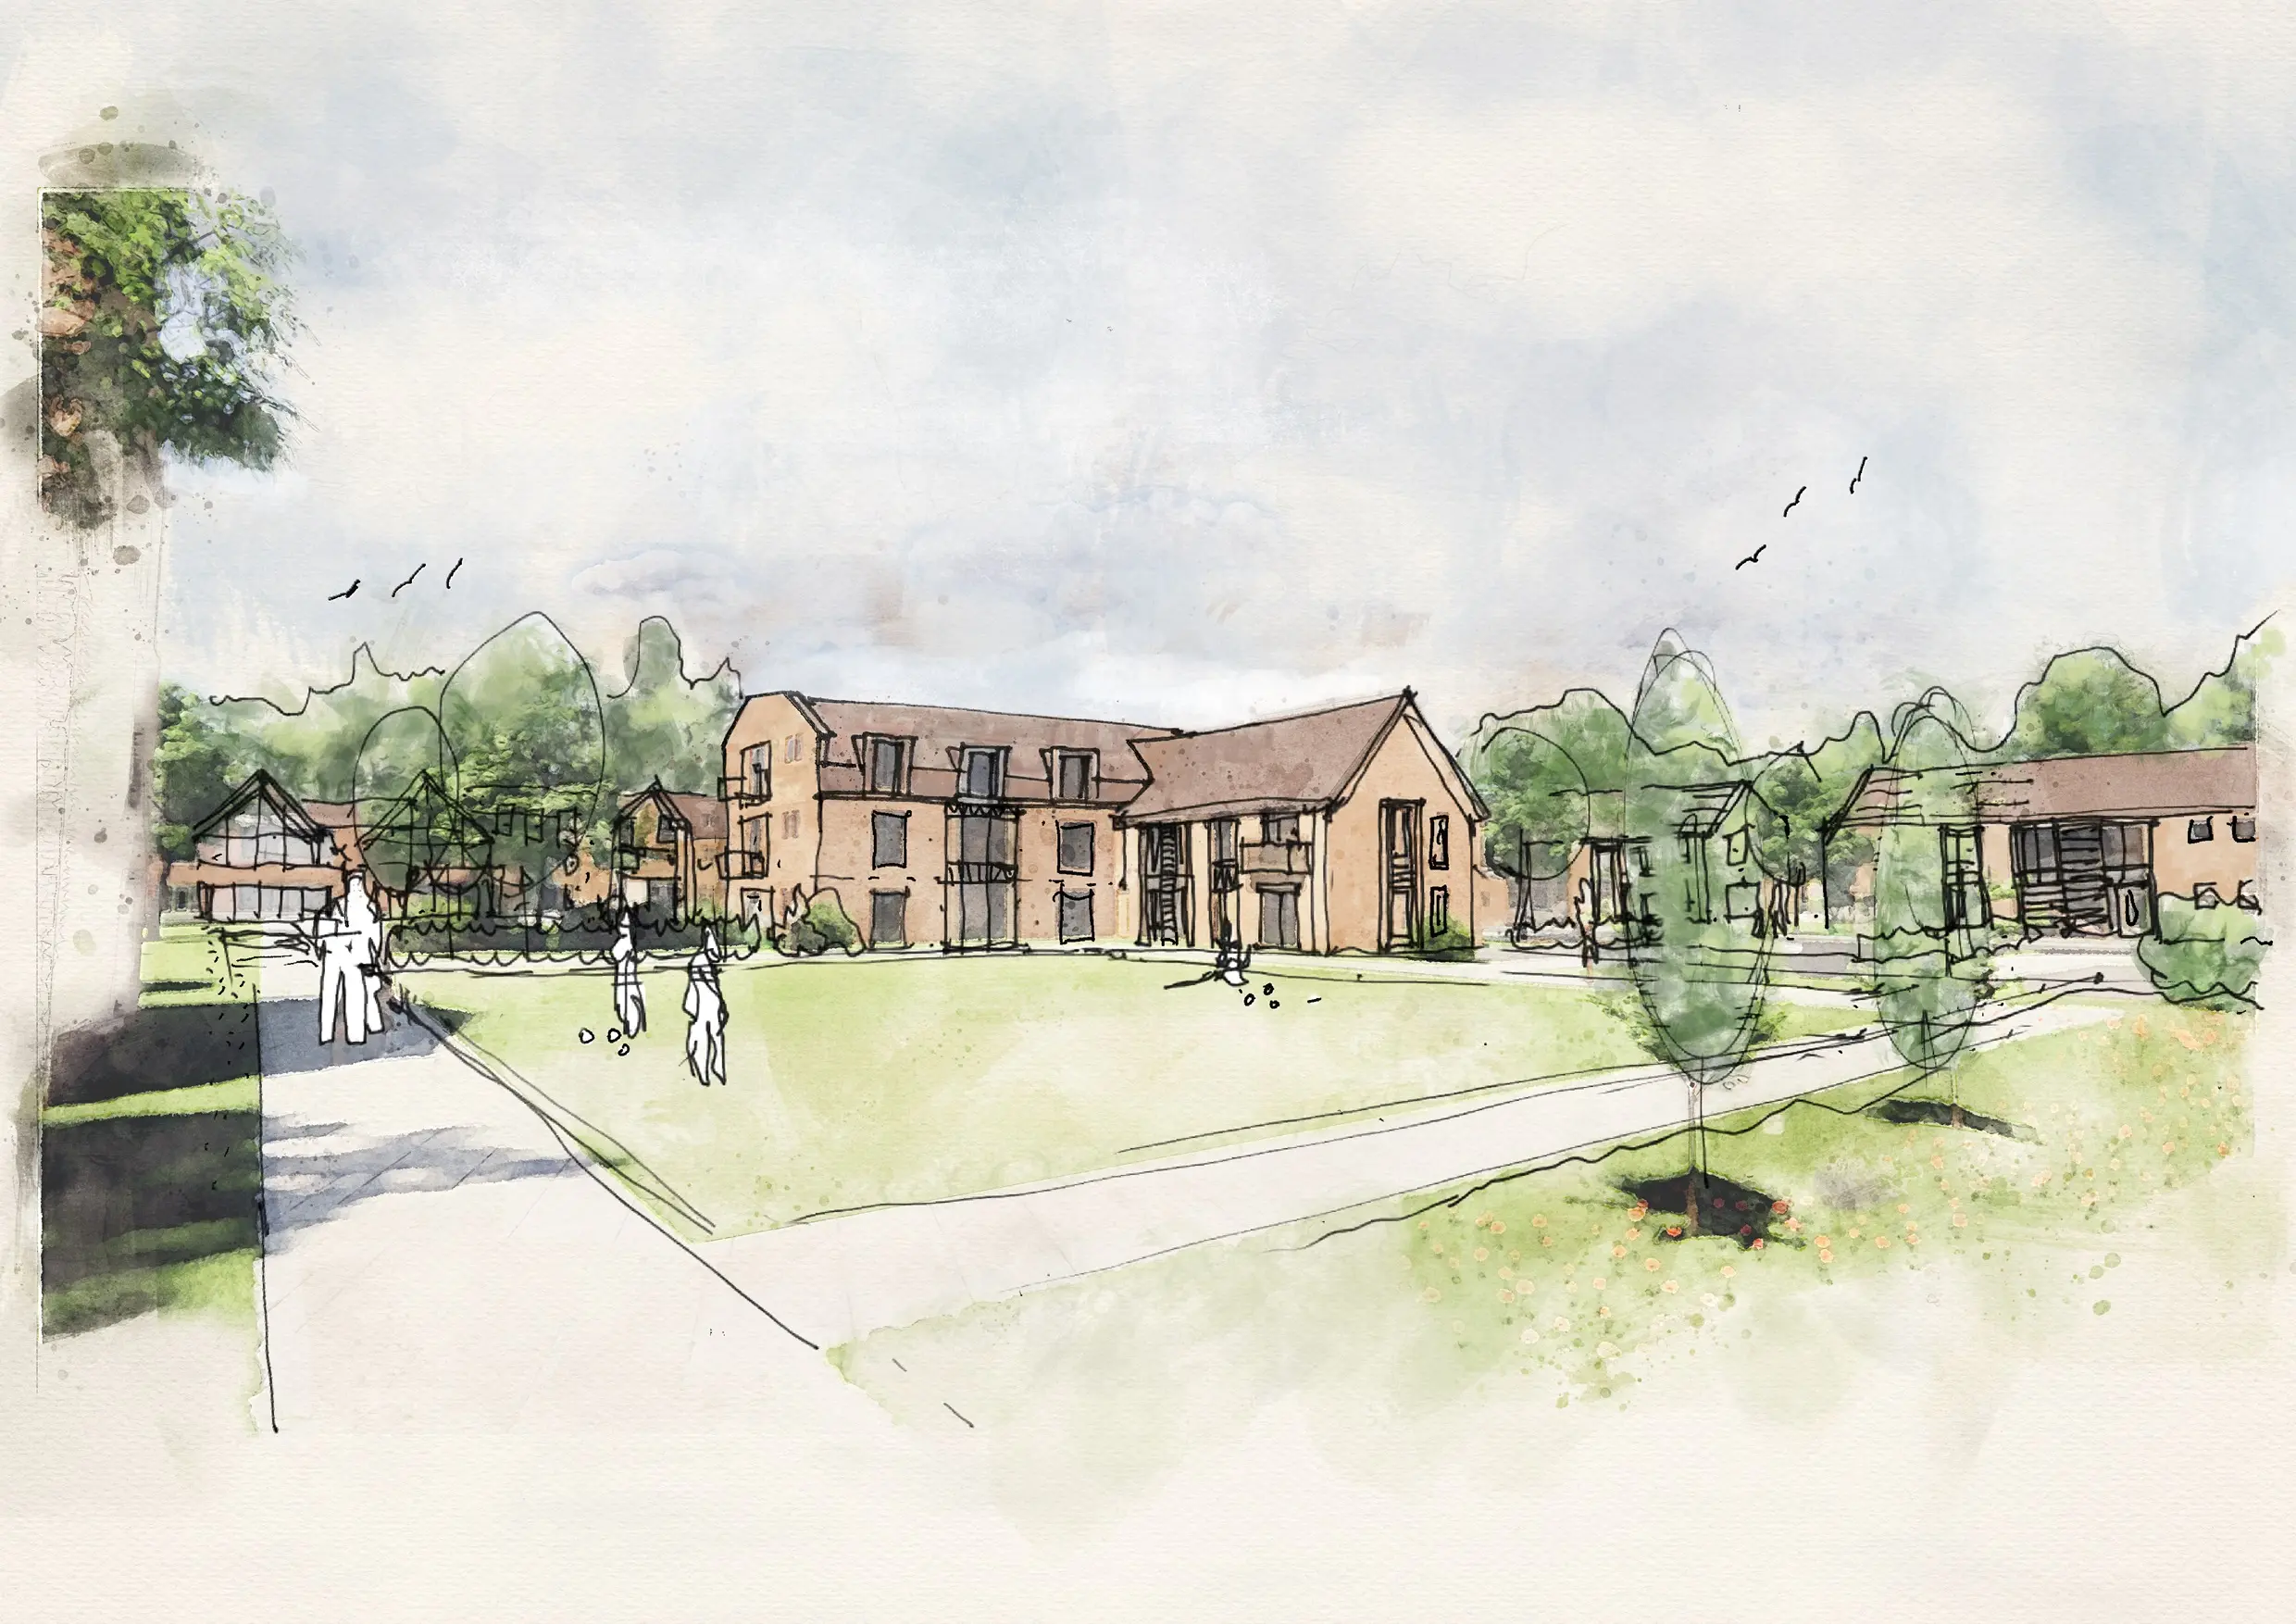 Public Consultation for an Integrated Retirement Community at Barford